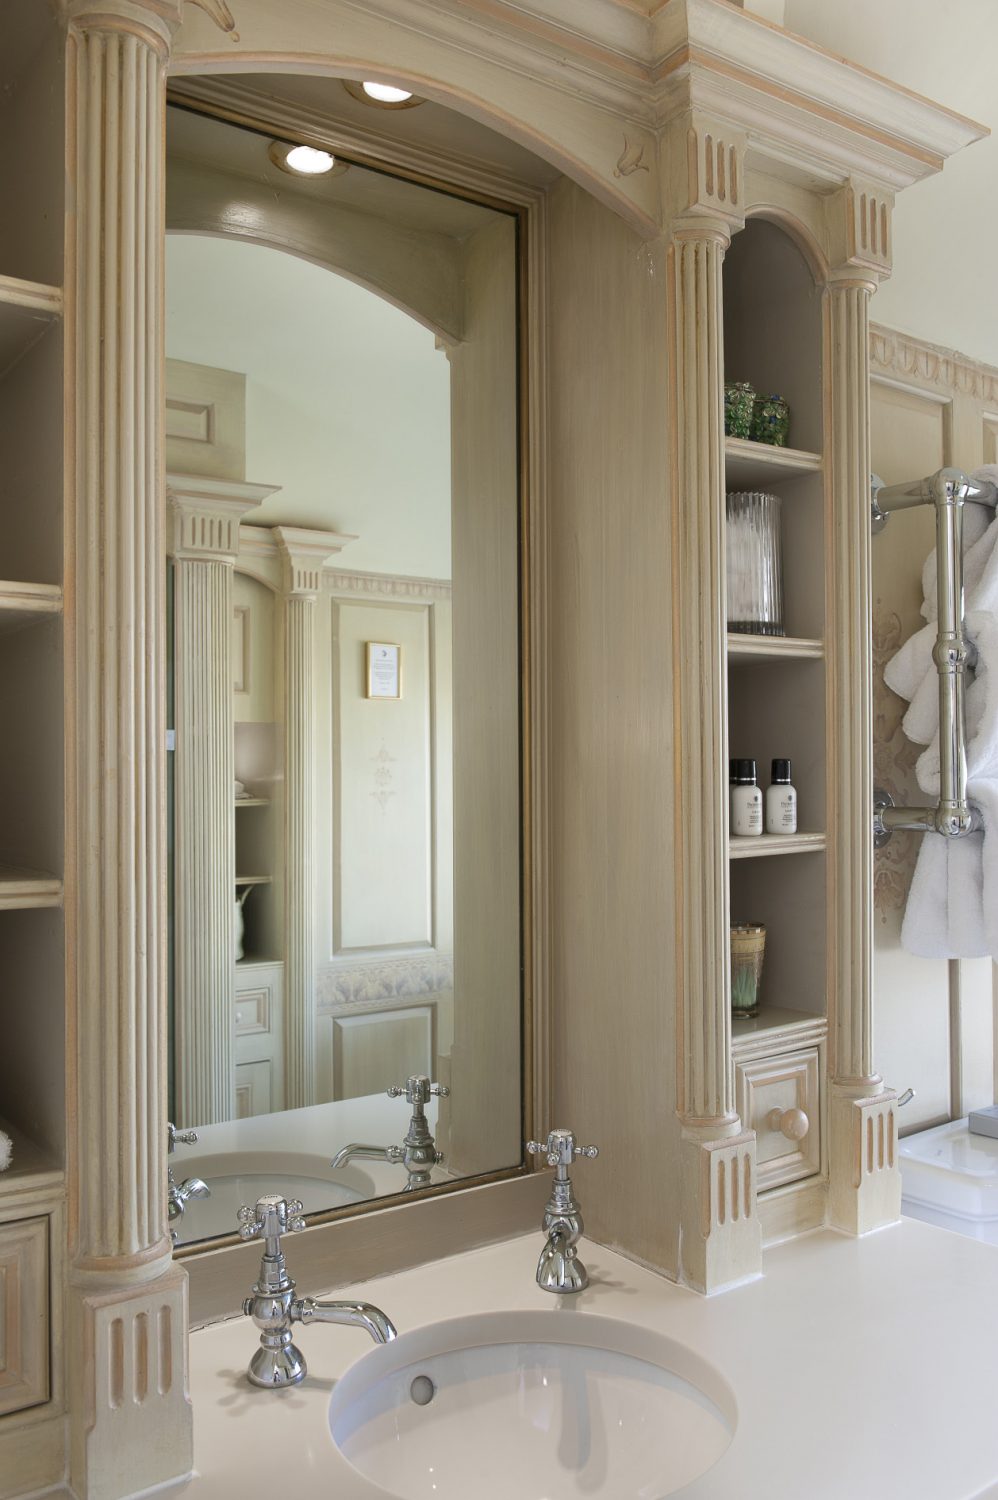 Sackville’s en suite has been beautifully hand-painted by Nina, taking four months to complete.